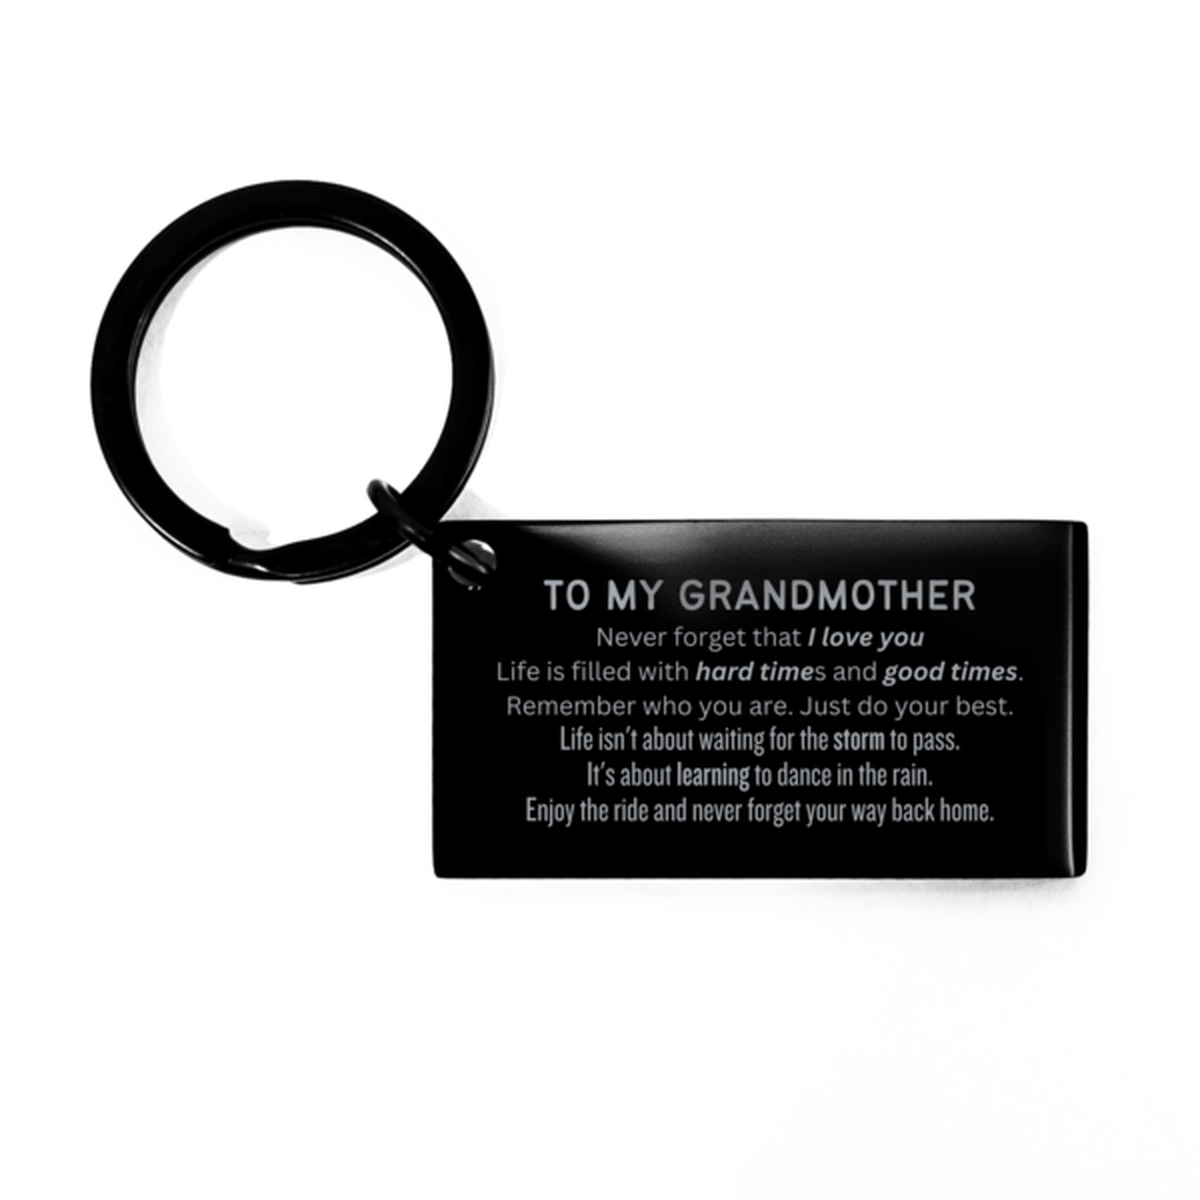 Christmas Grandmother Keychain Gifts, To My Grandmother Birthday Thank You Gifts For Grandmother, Graduation Unique Gifts For Grandmother To My Grandmother Never forget that I love you life is filled with hard times and good times. Remember who you are. J